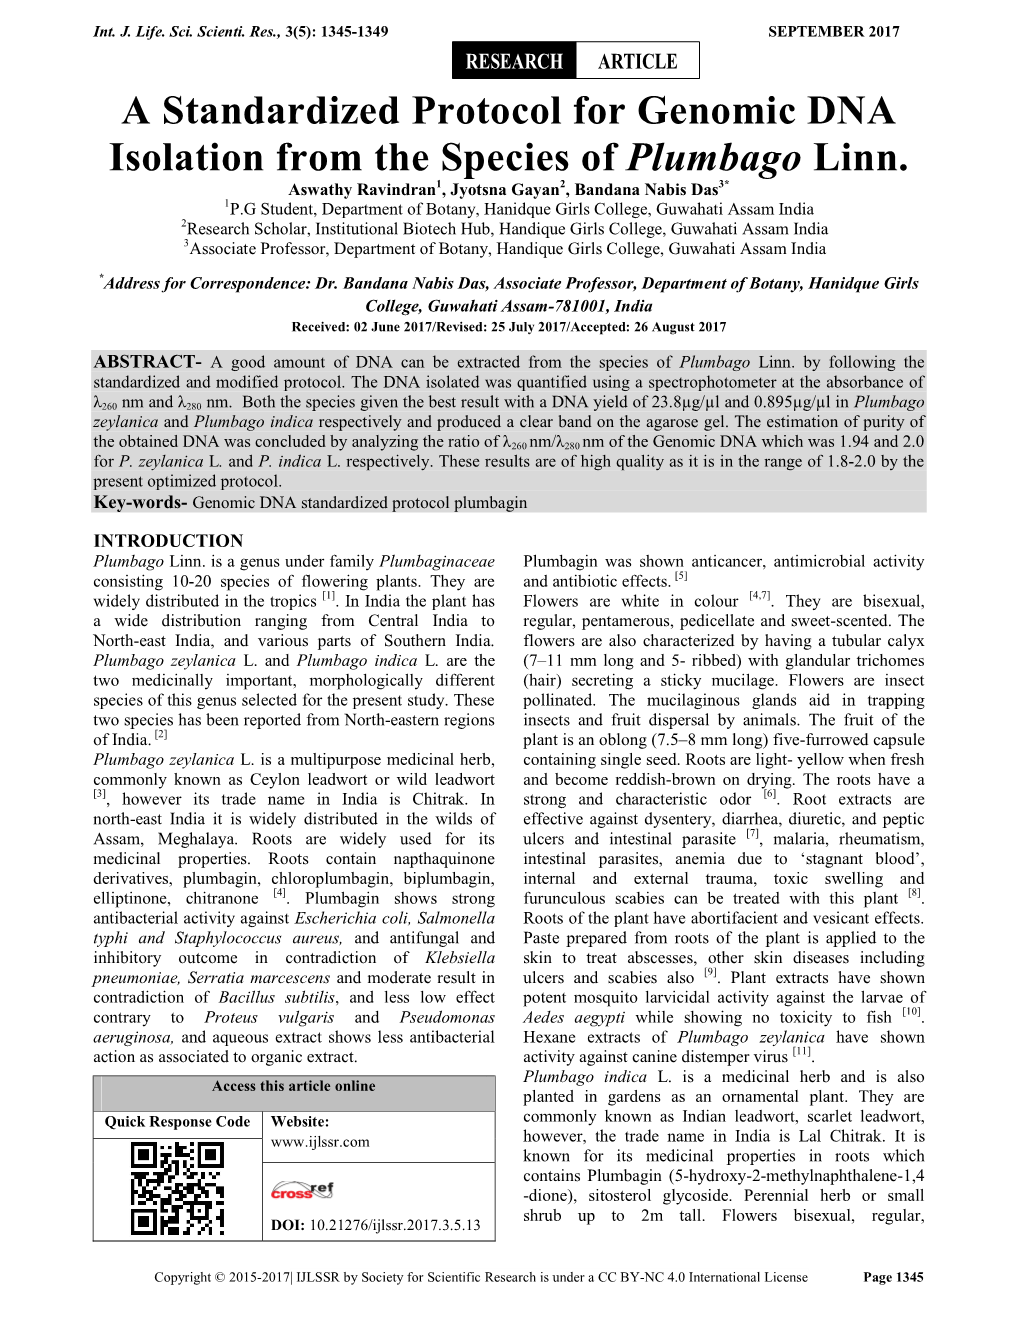 A Standardized Protocol for Genomic DNA Isolation from the Species of Plumbago Linn